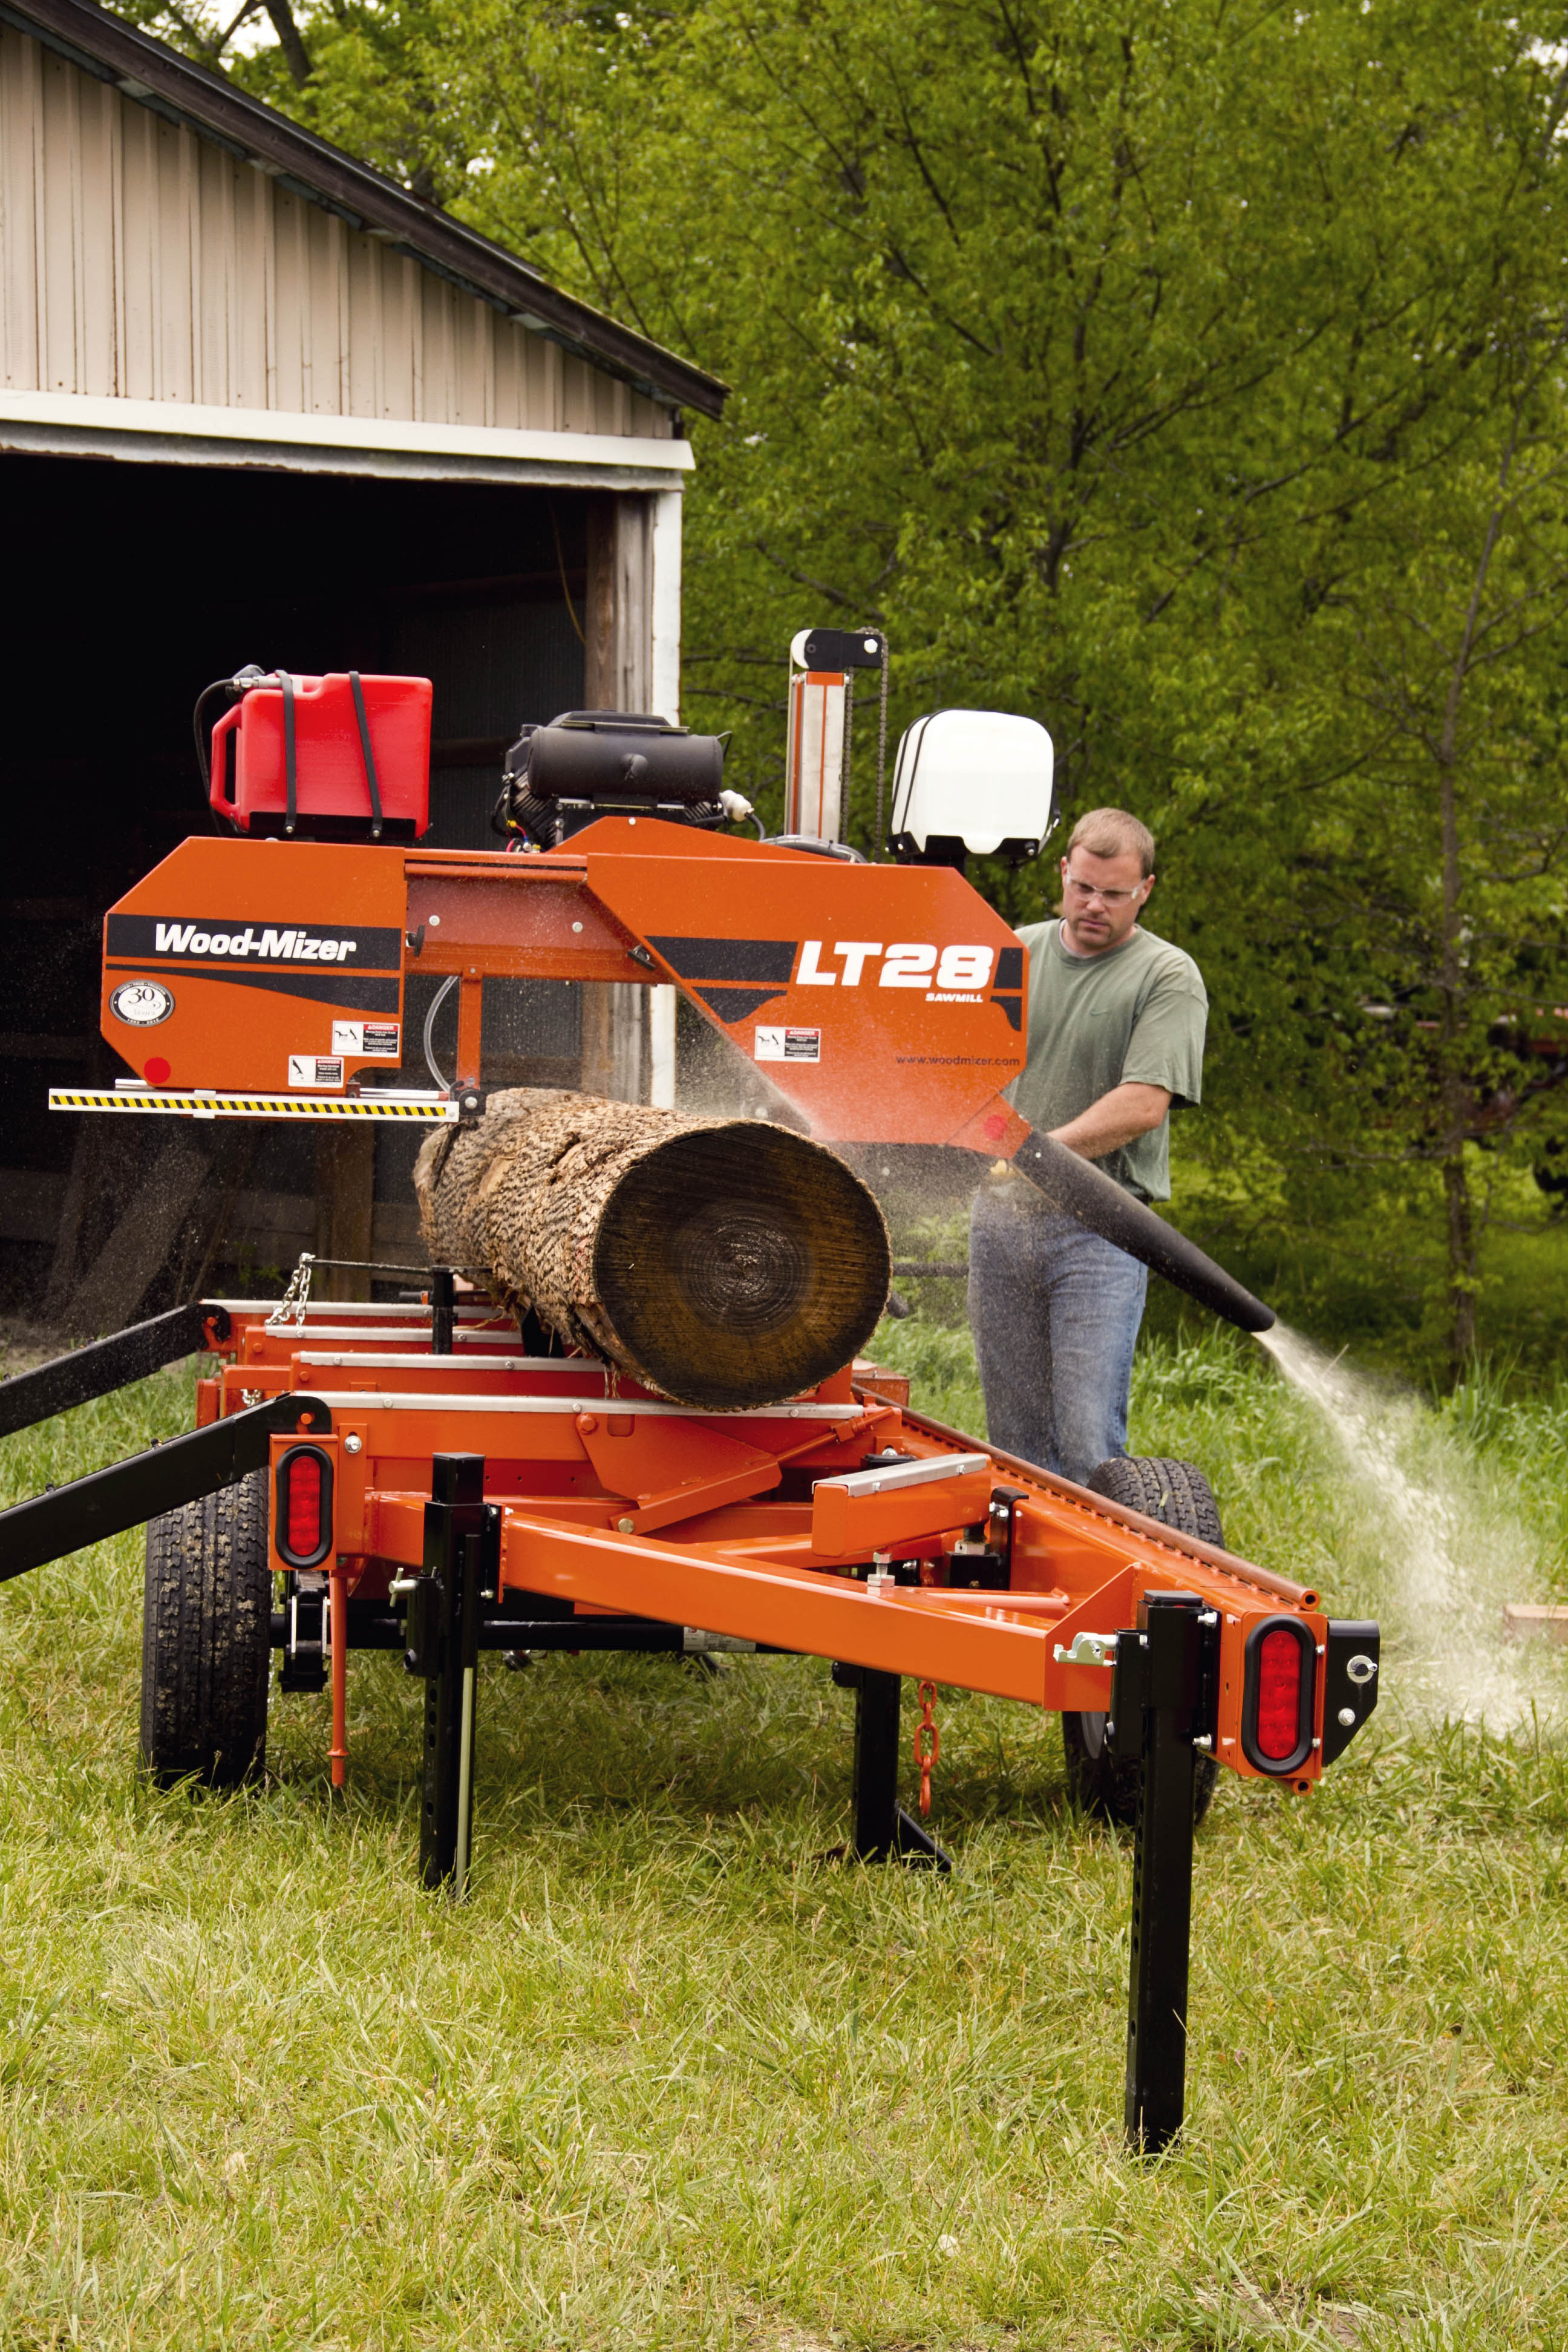 Wood-Mizer sawmills enable hobbyists and professionals to efficiently saw logs into lumber.